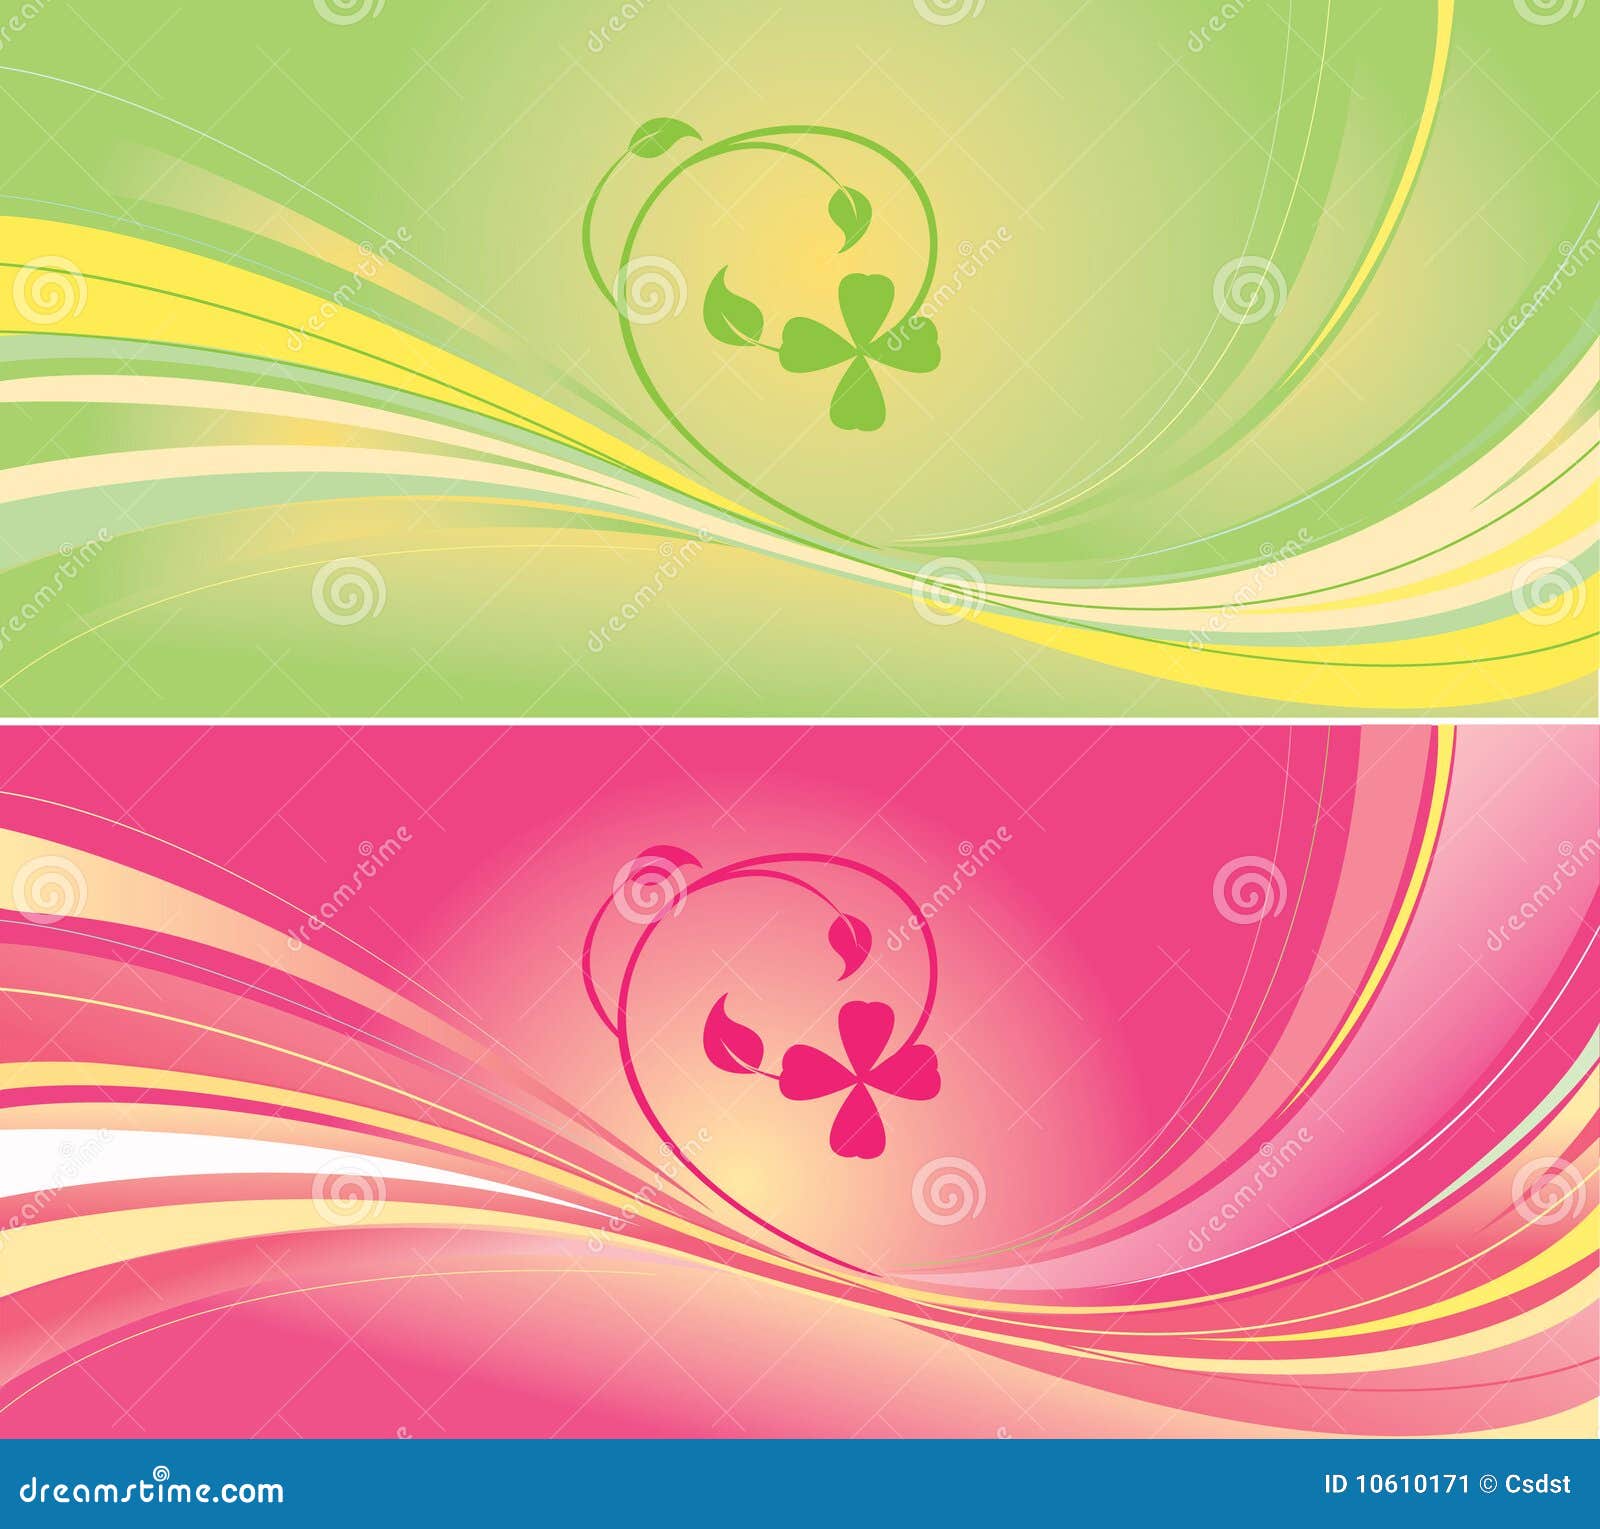 Green and pink backgrounds stock vector. Illustration of artistically